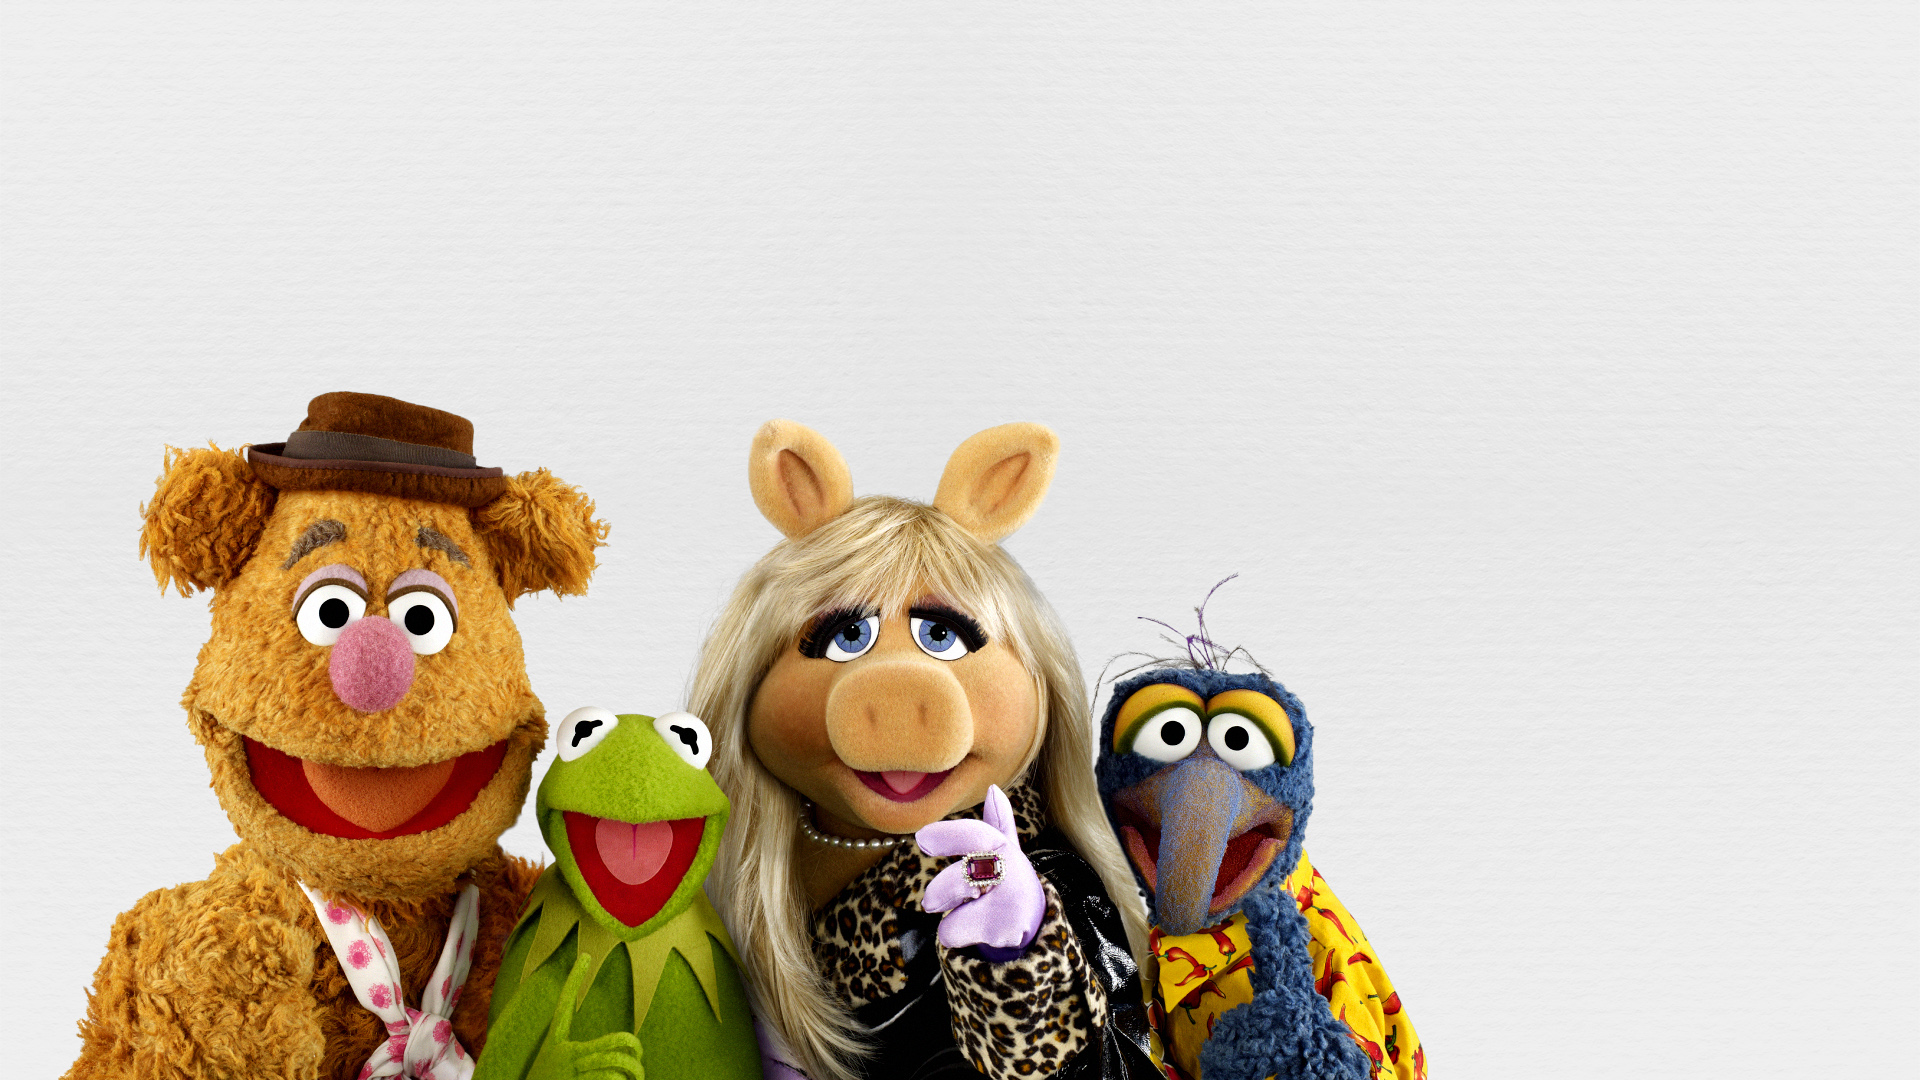 the muppets (tv show), tv show, the muppets, kermit the frog